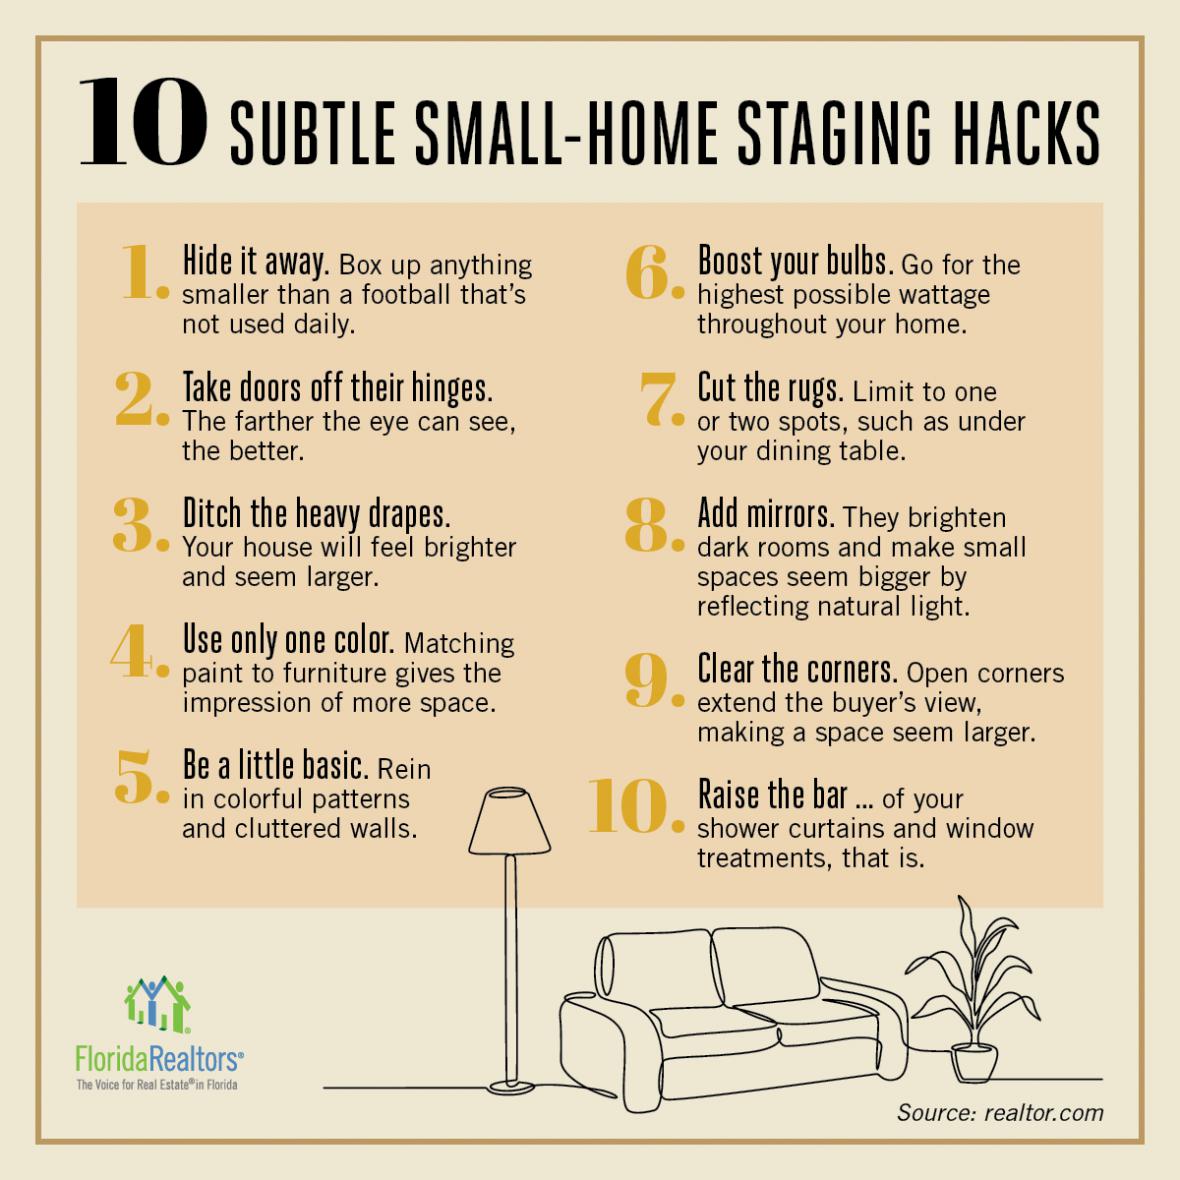 Small-home staging hacks